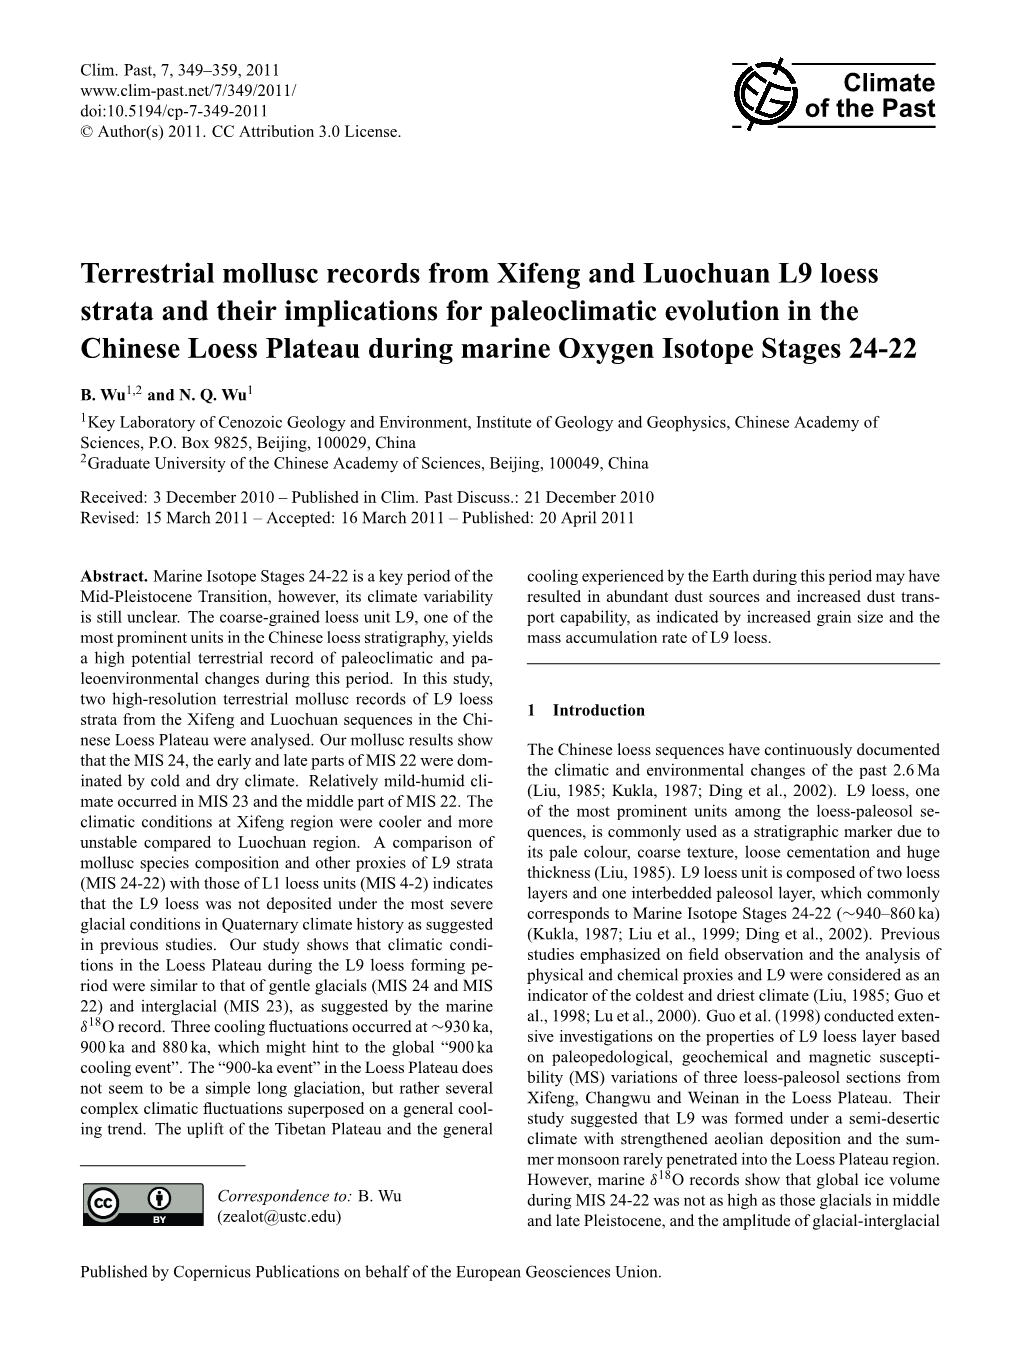 Terrestrial Mollusc Records from Xifeng and Luochuan L9 Loess Strata And